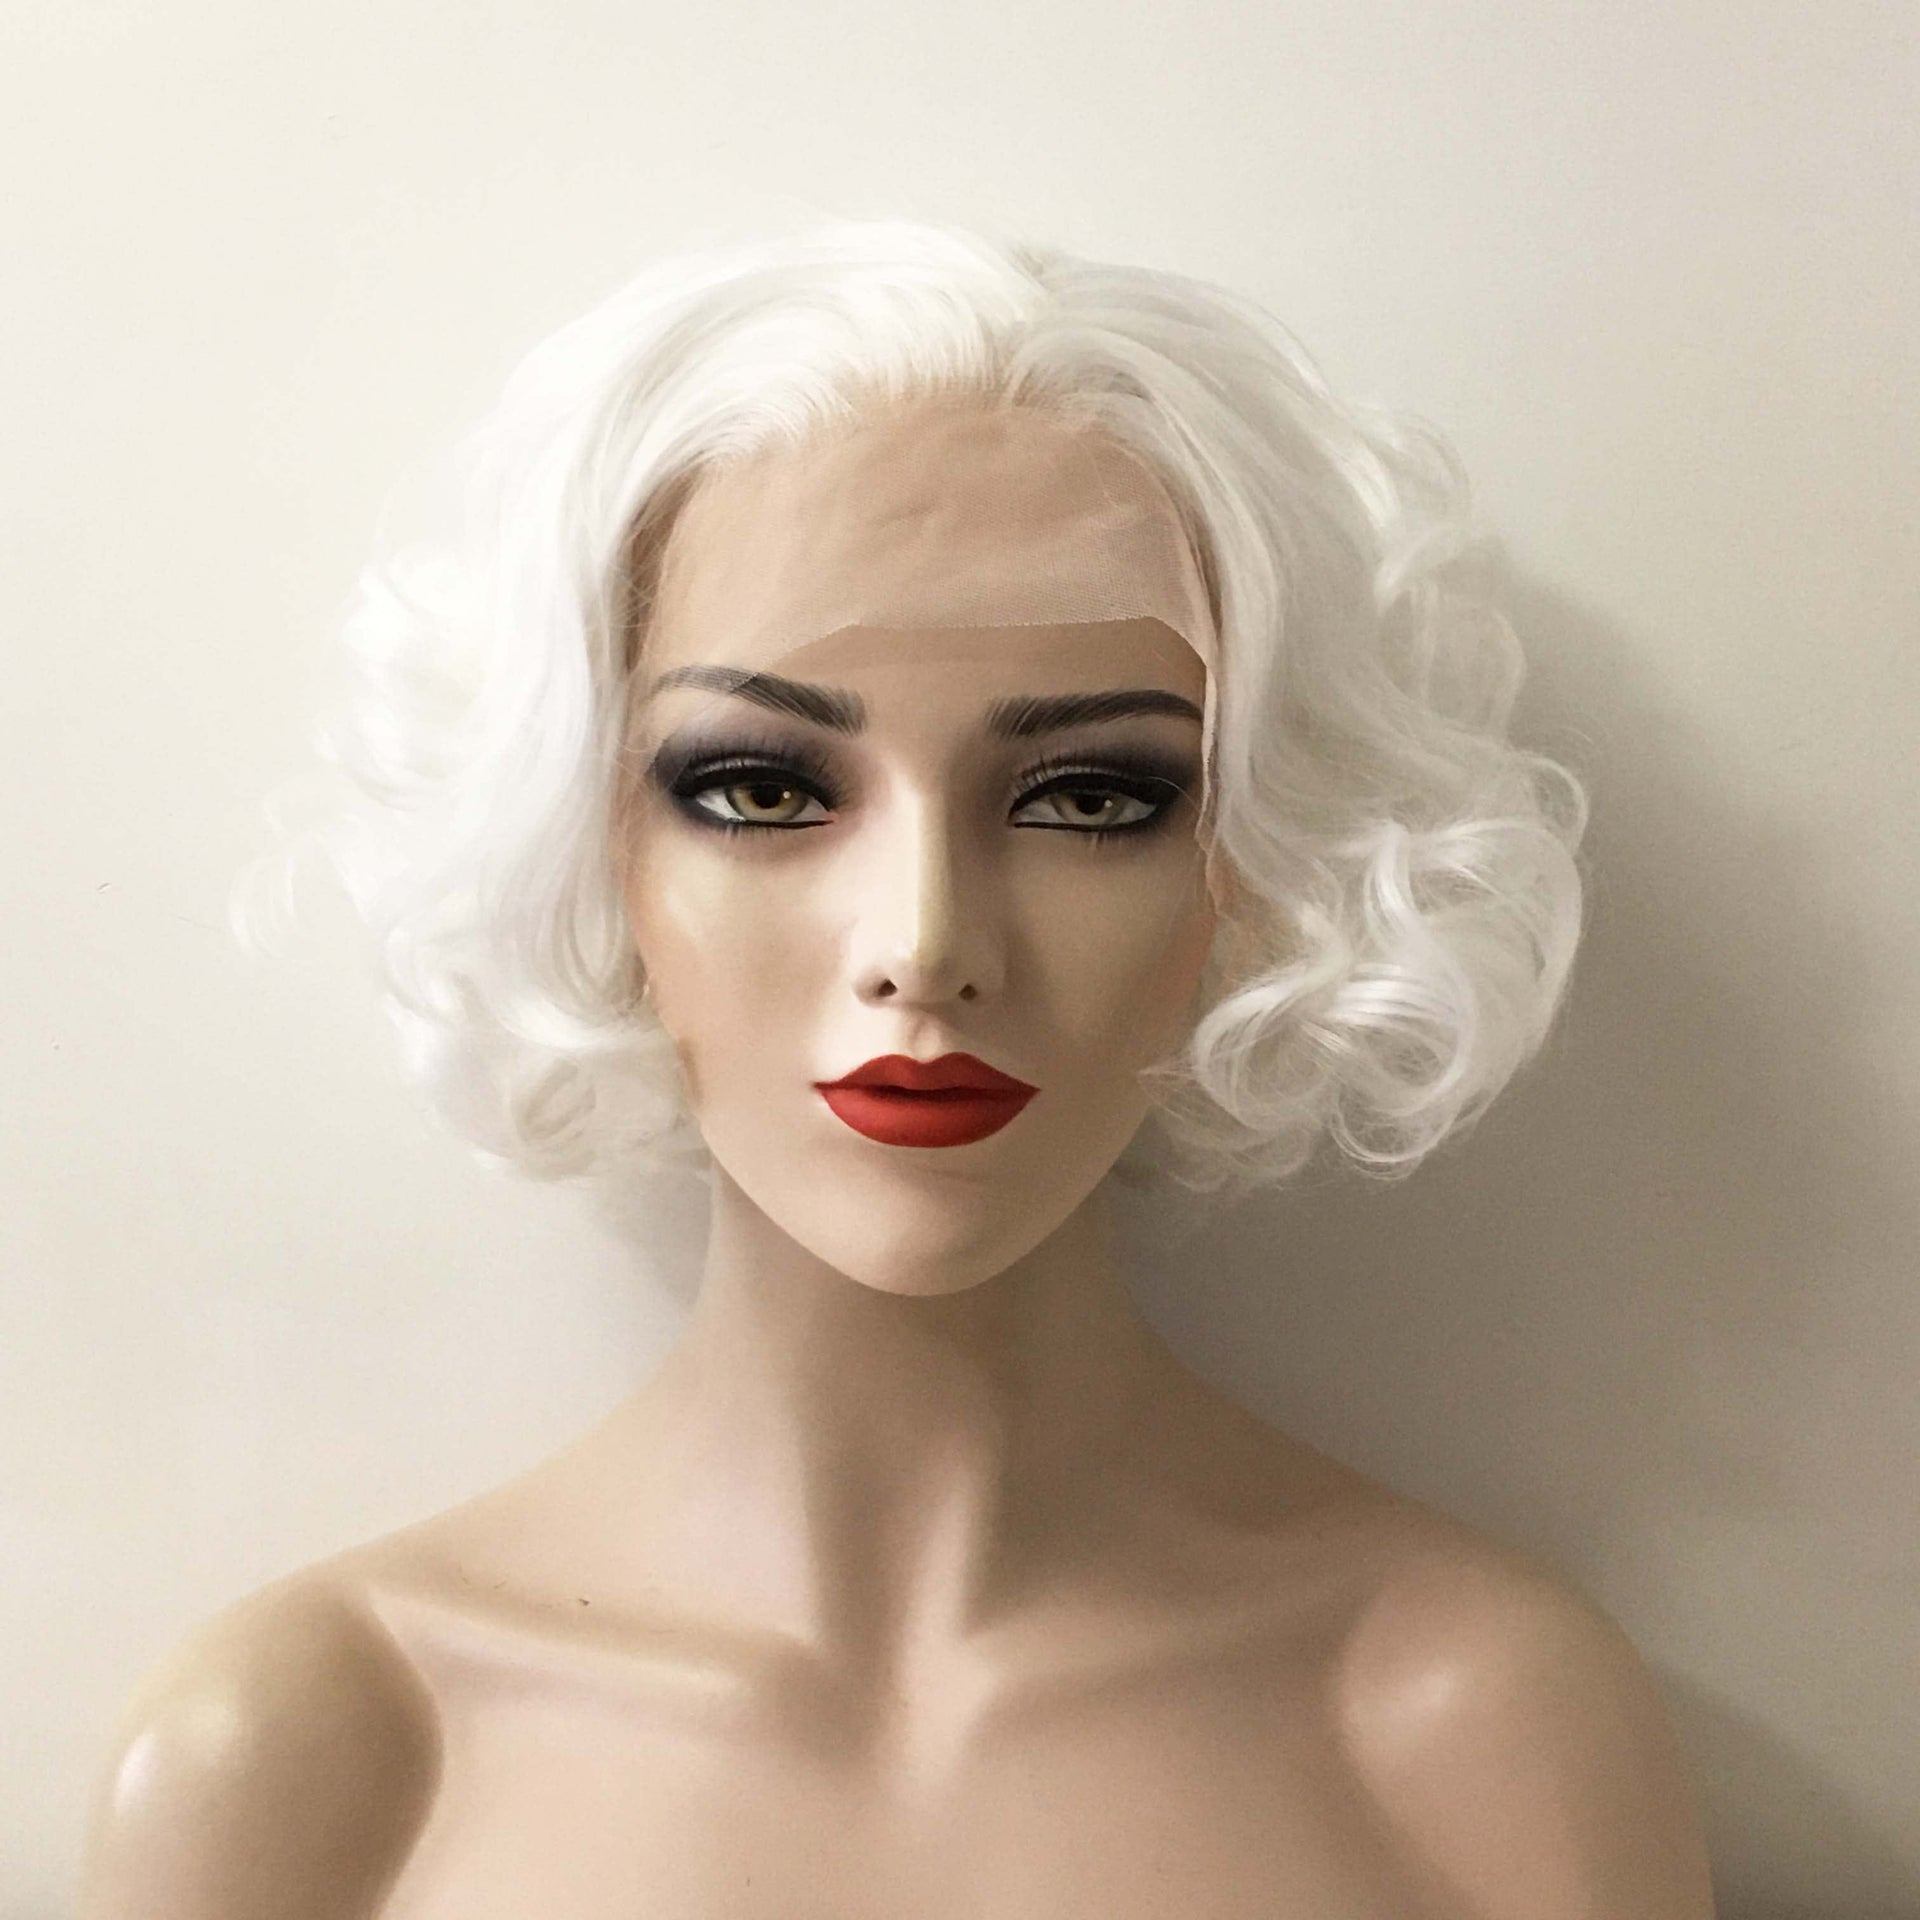 nevermindyrhead Women Snow White Lace Front Short Curly Vintage Style Slicked Back Wig